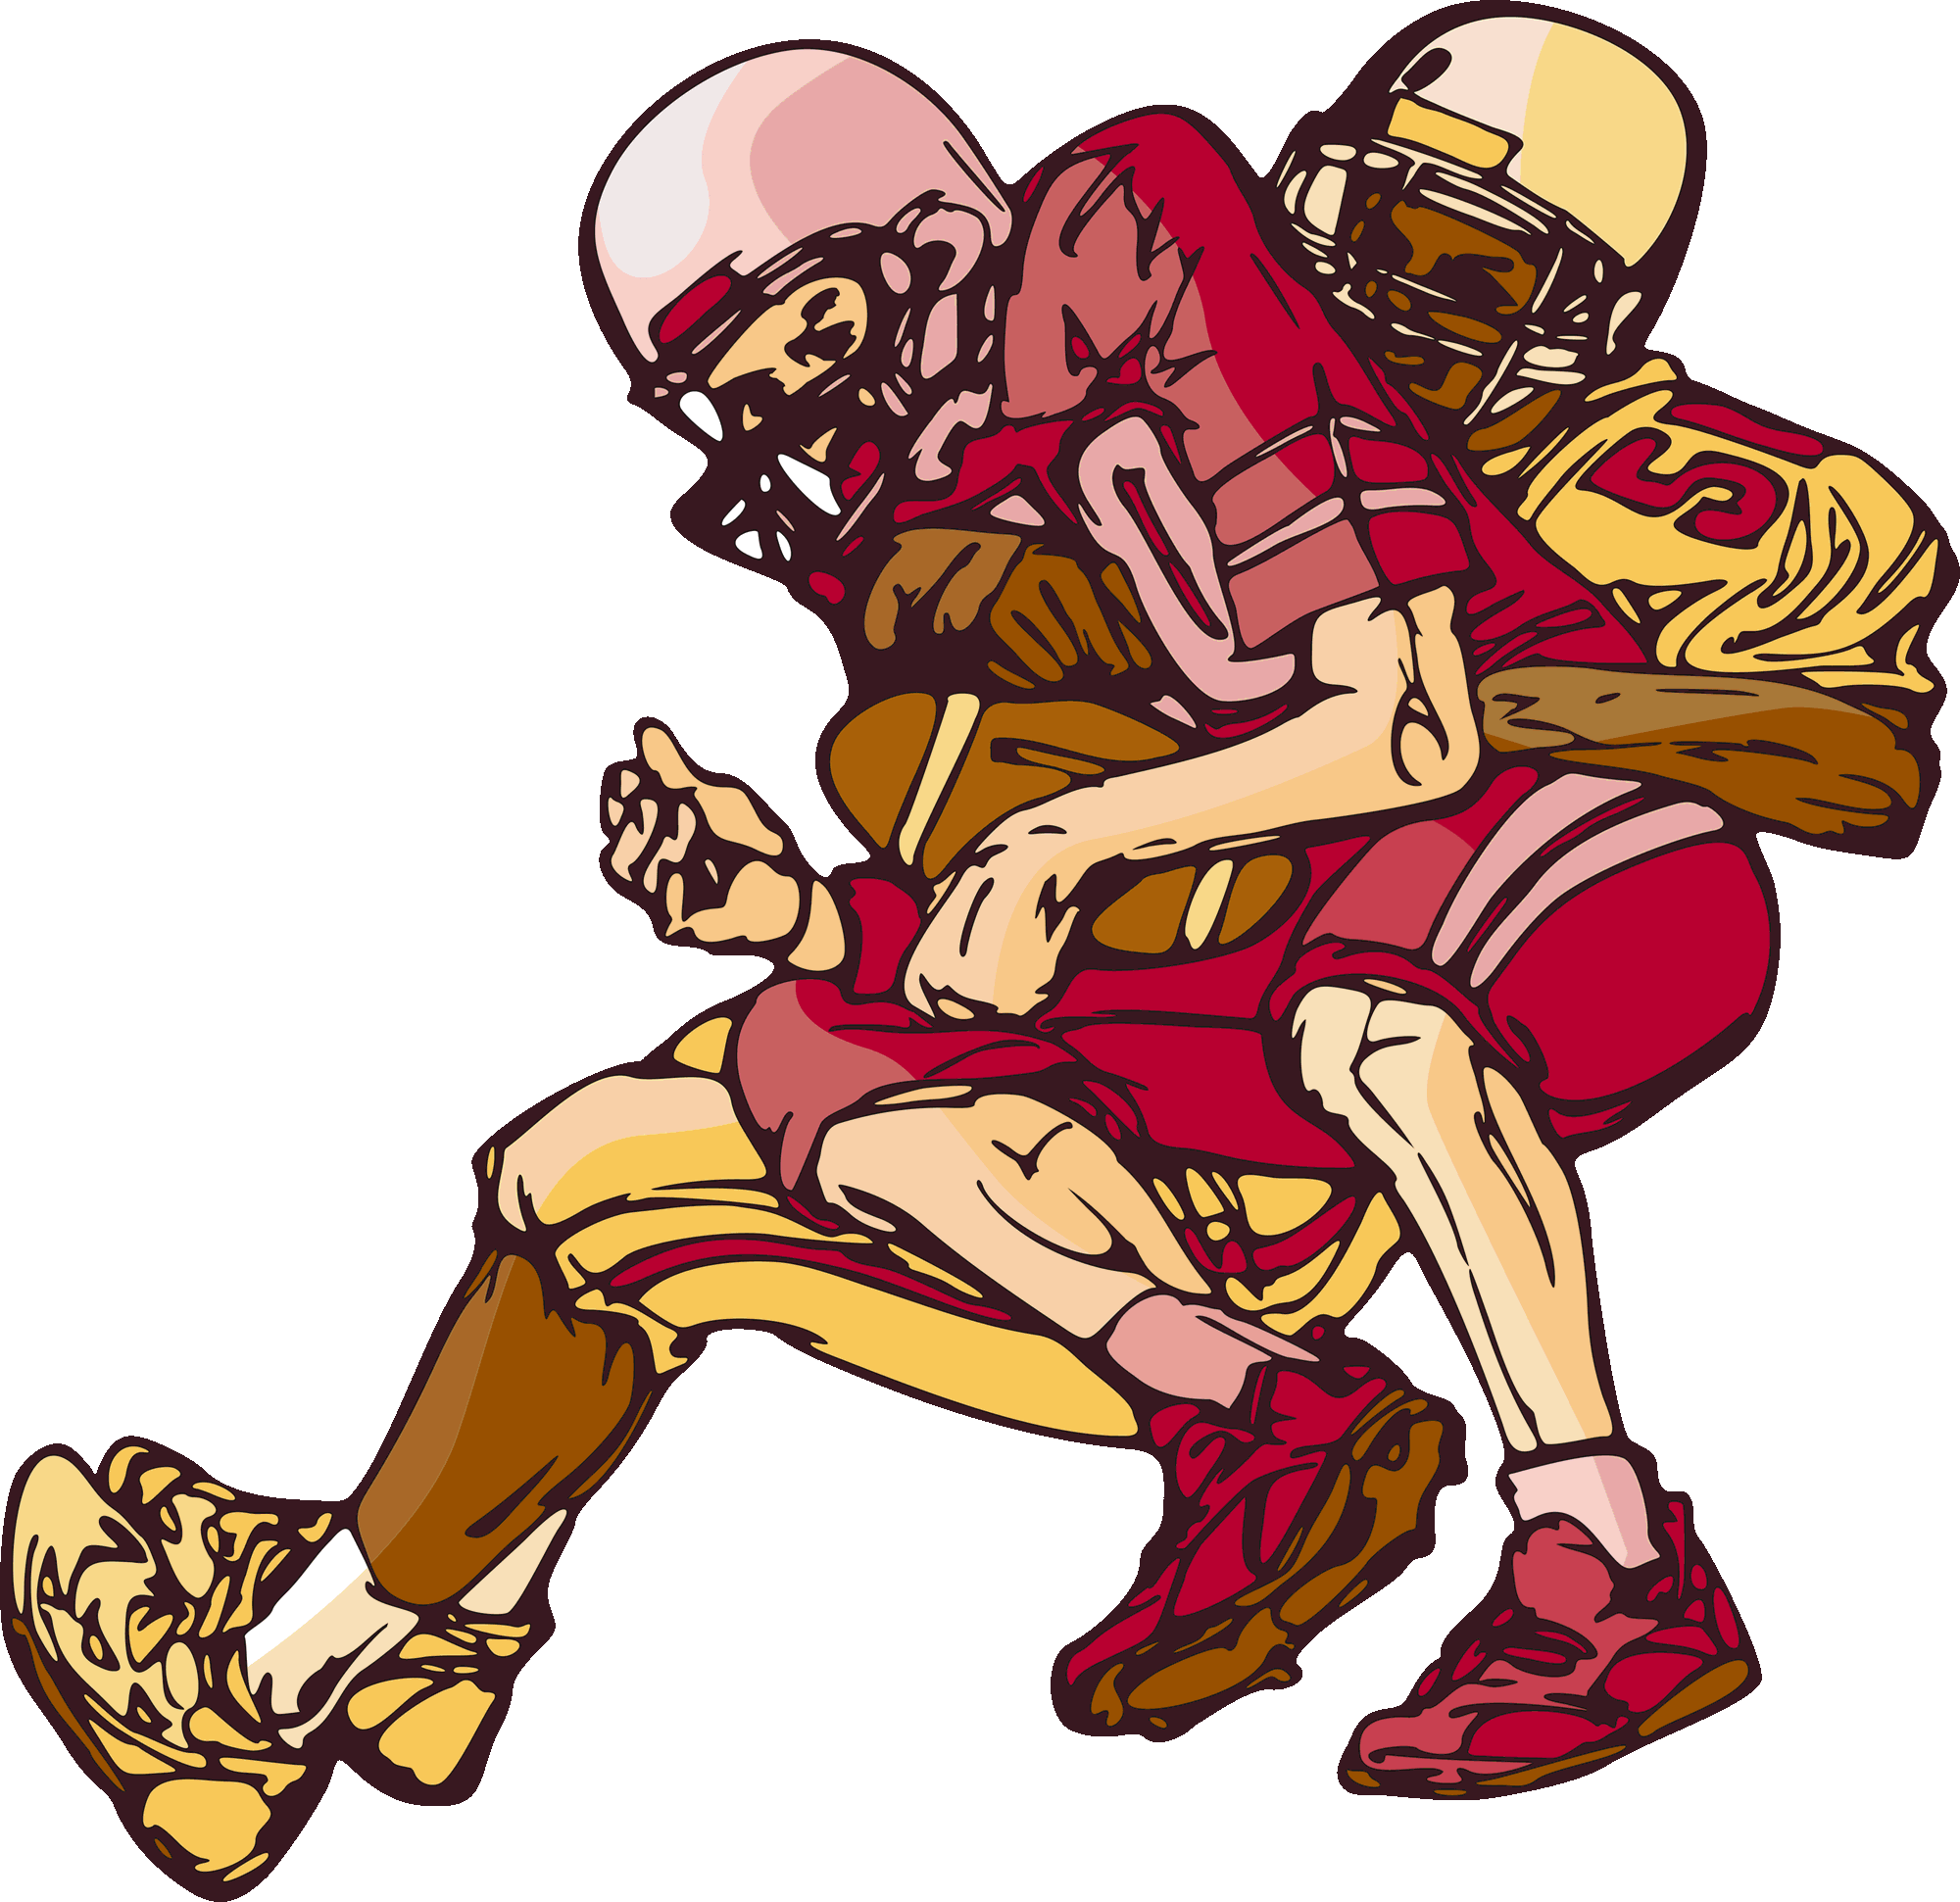 Dancers, Football Players | Clipart Panda - Free Clipart Images